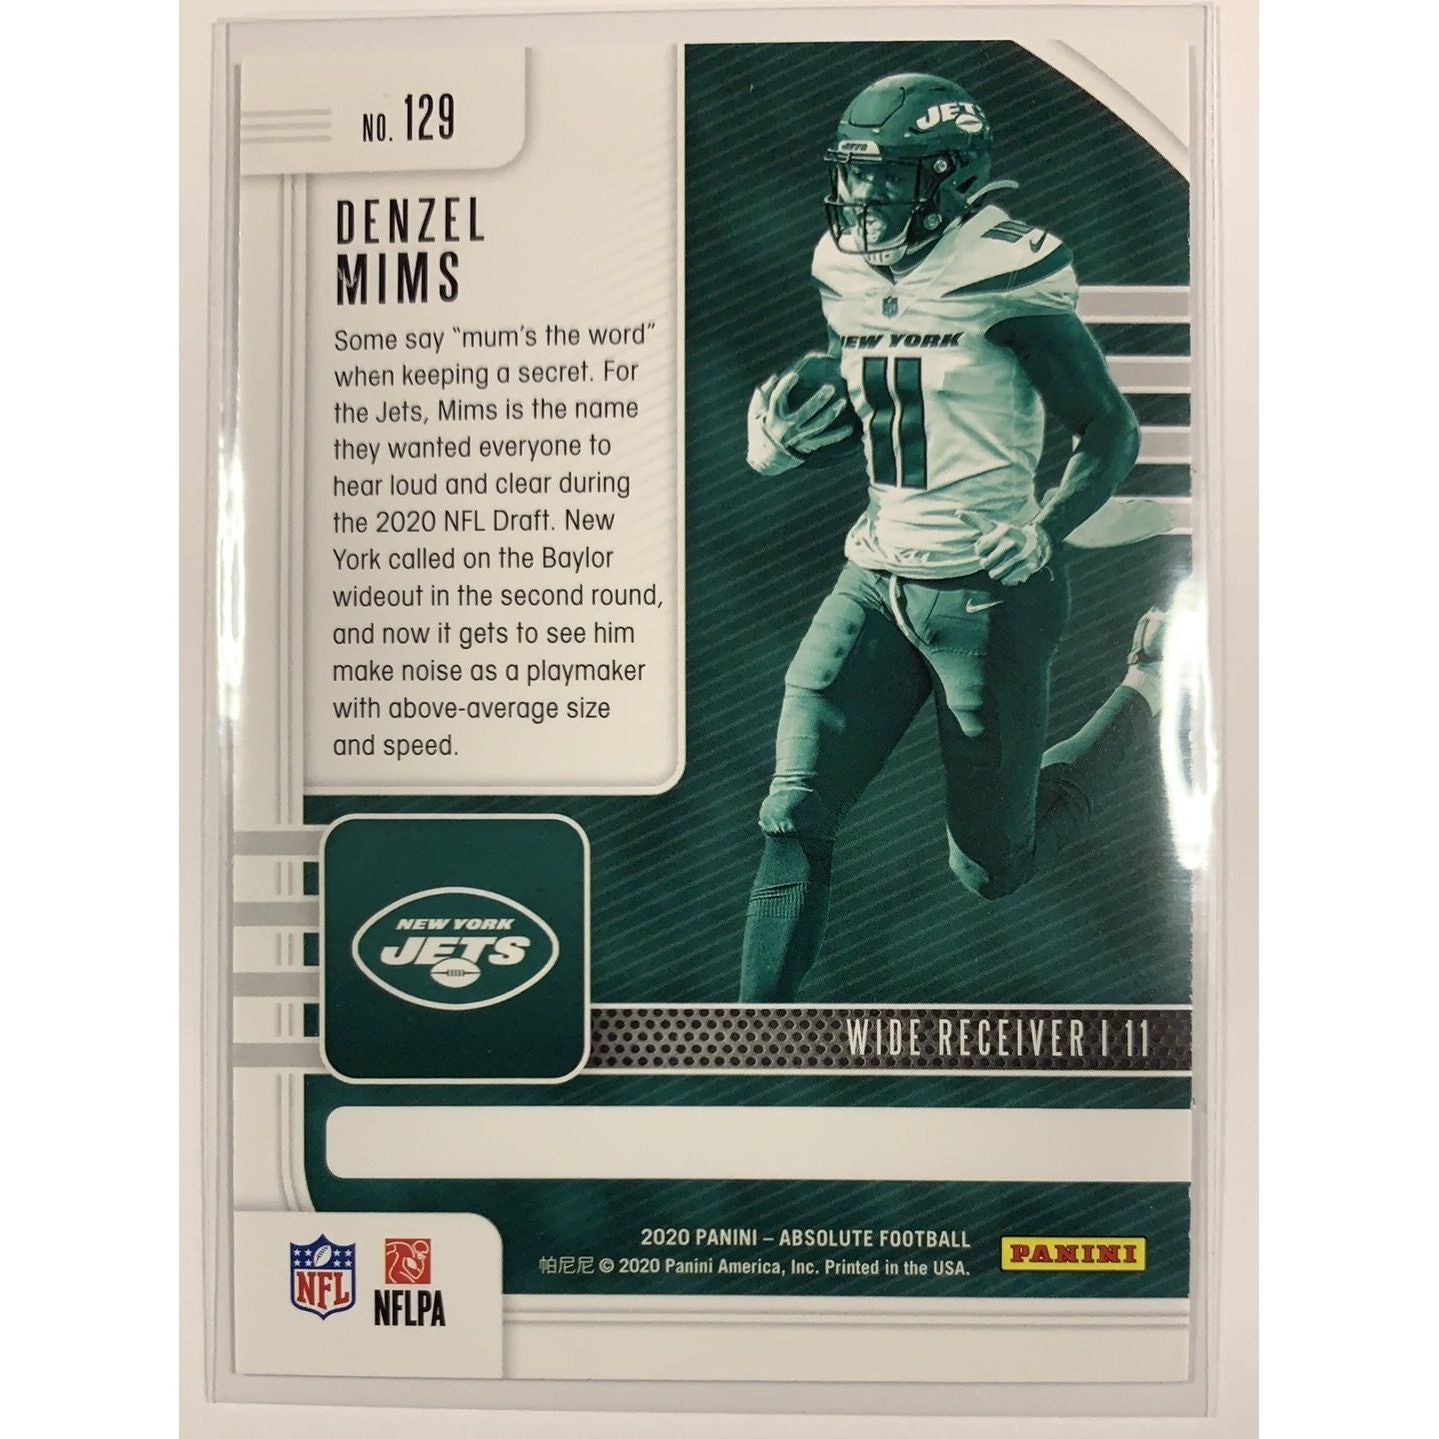  2020 Panini Absolute Denzel Mims RC  Local Legends Cards & Collectibles